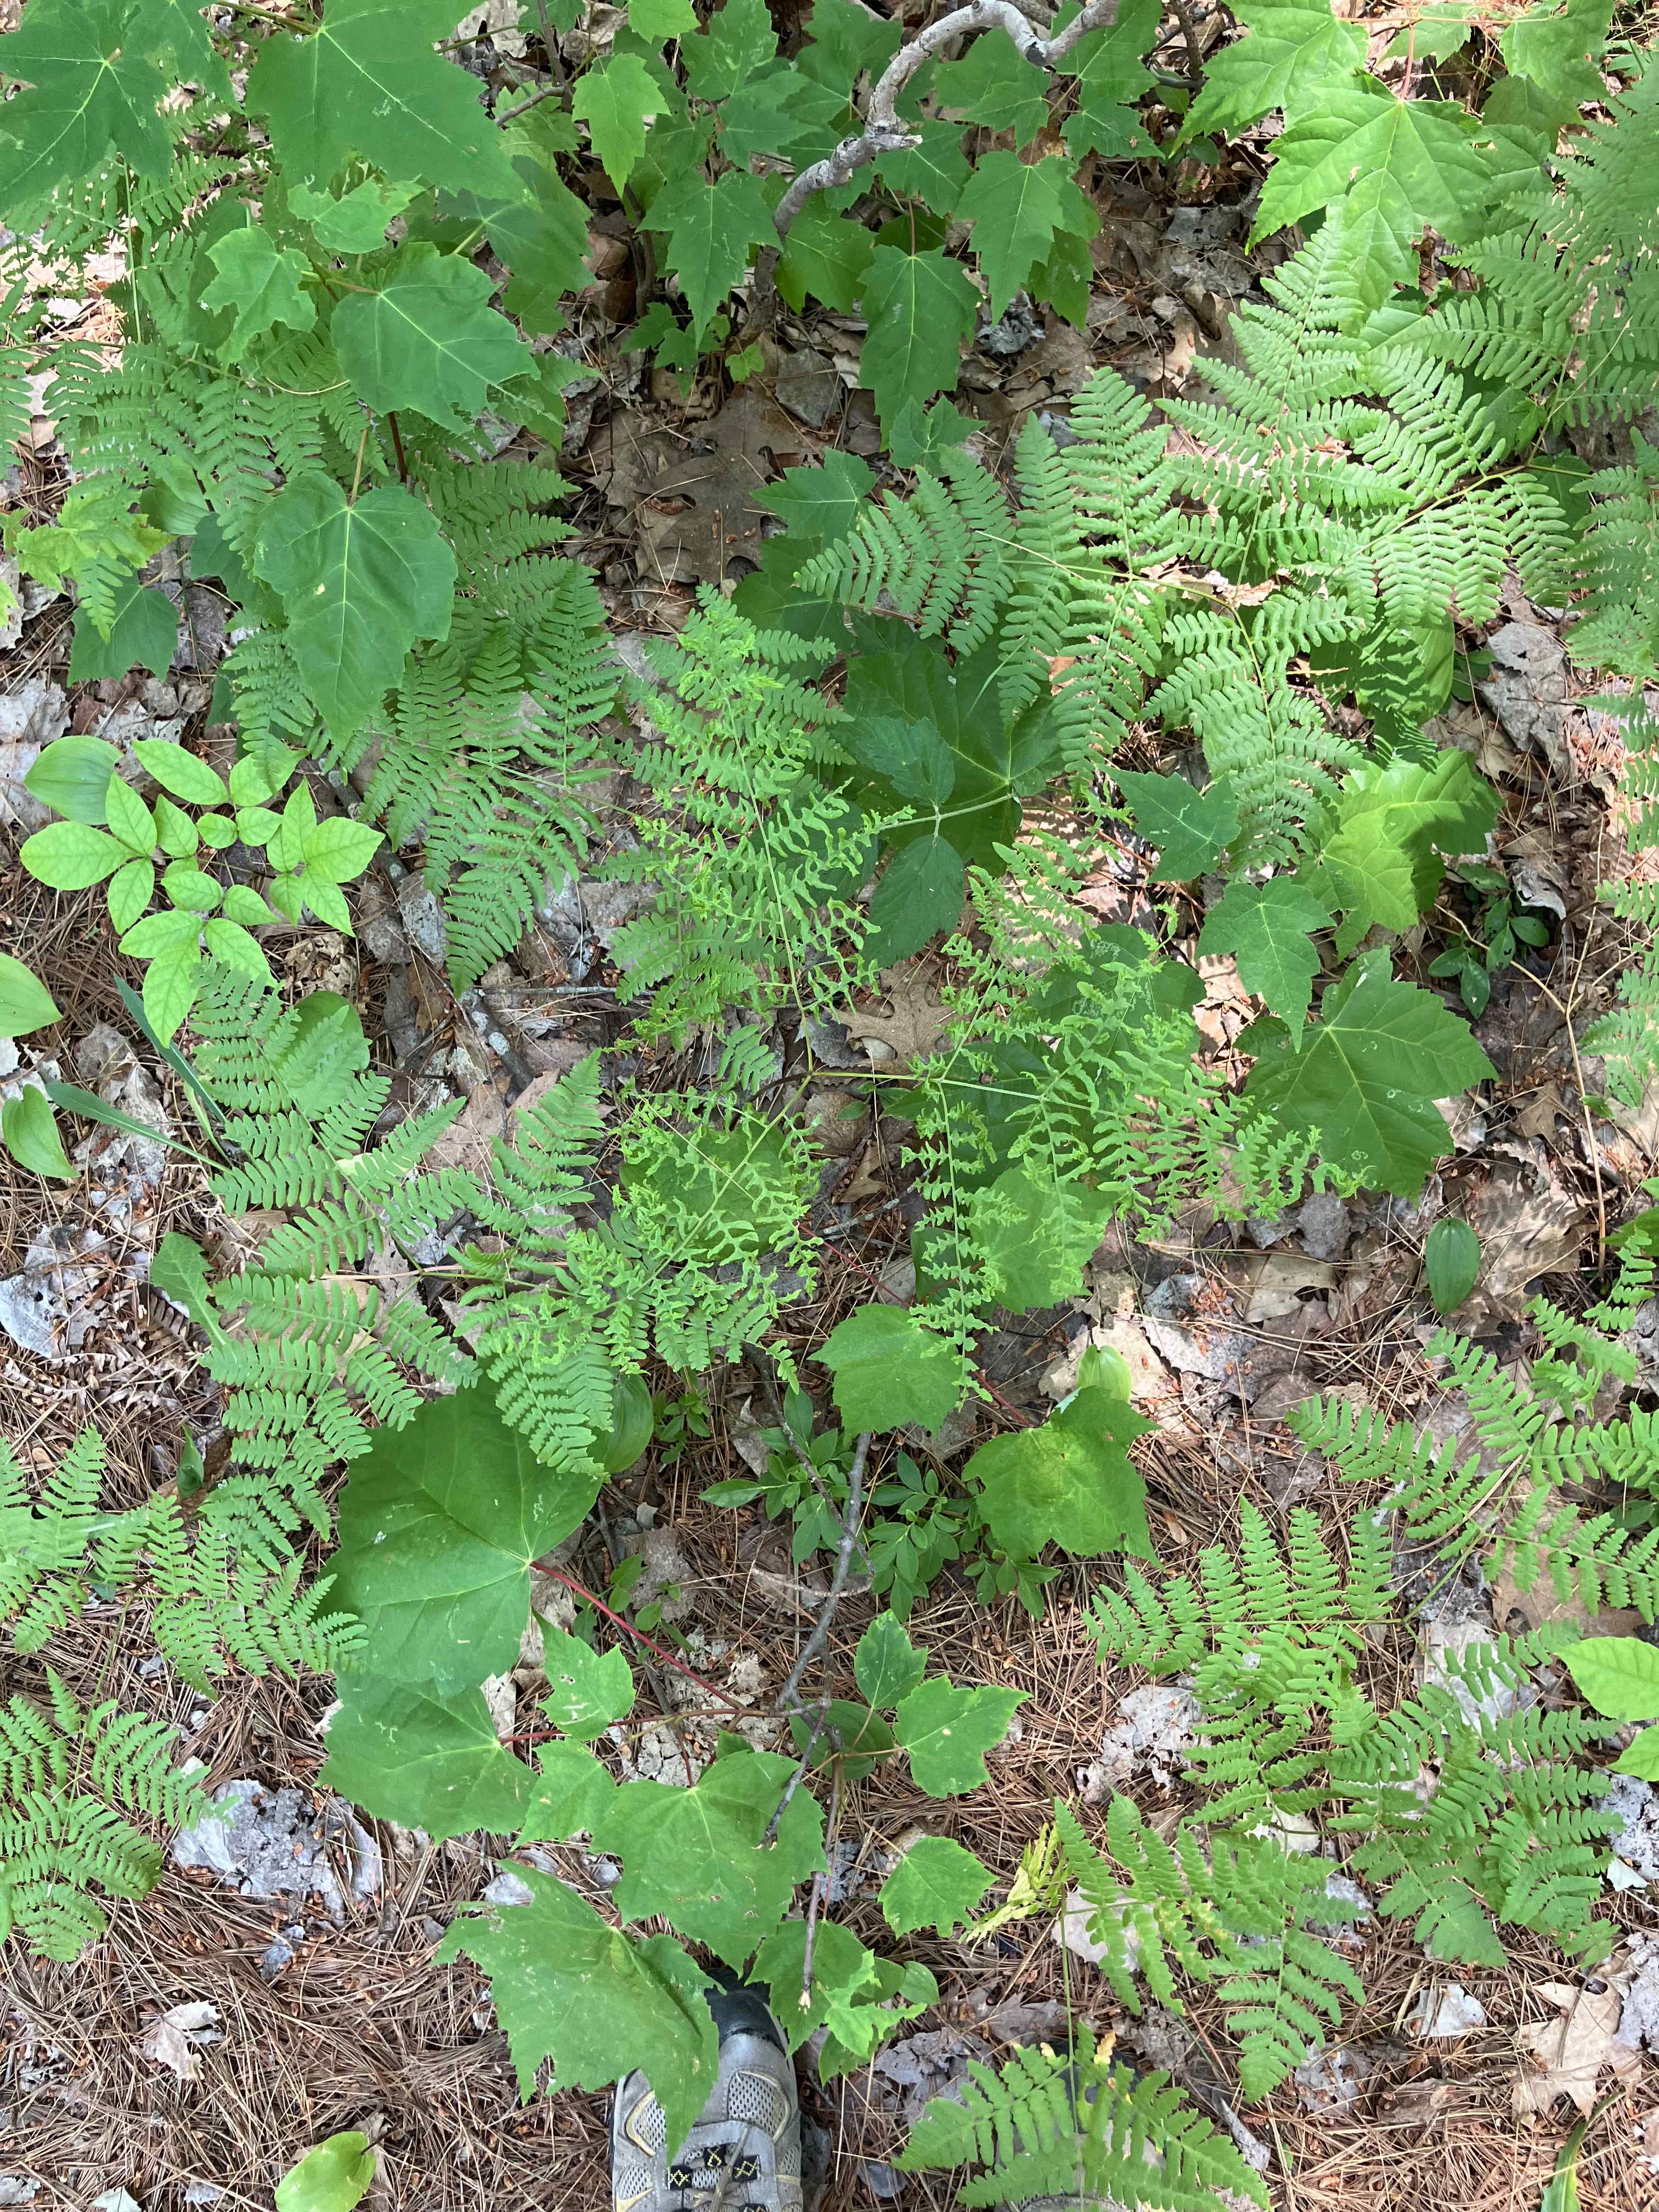 Bracken fern showing signs of infection by Cryptomycina pteridis